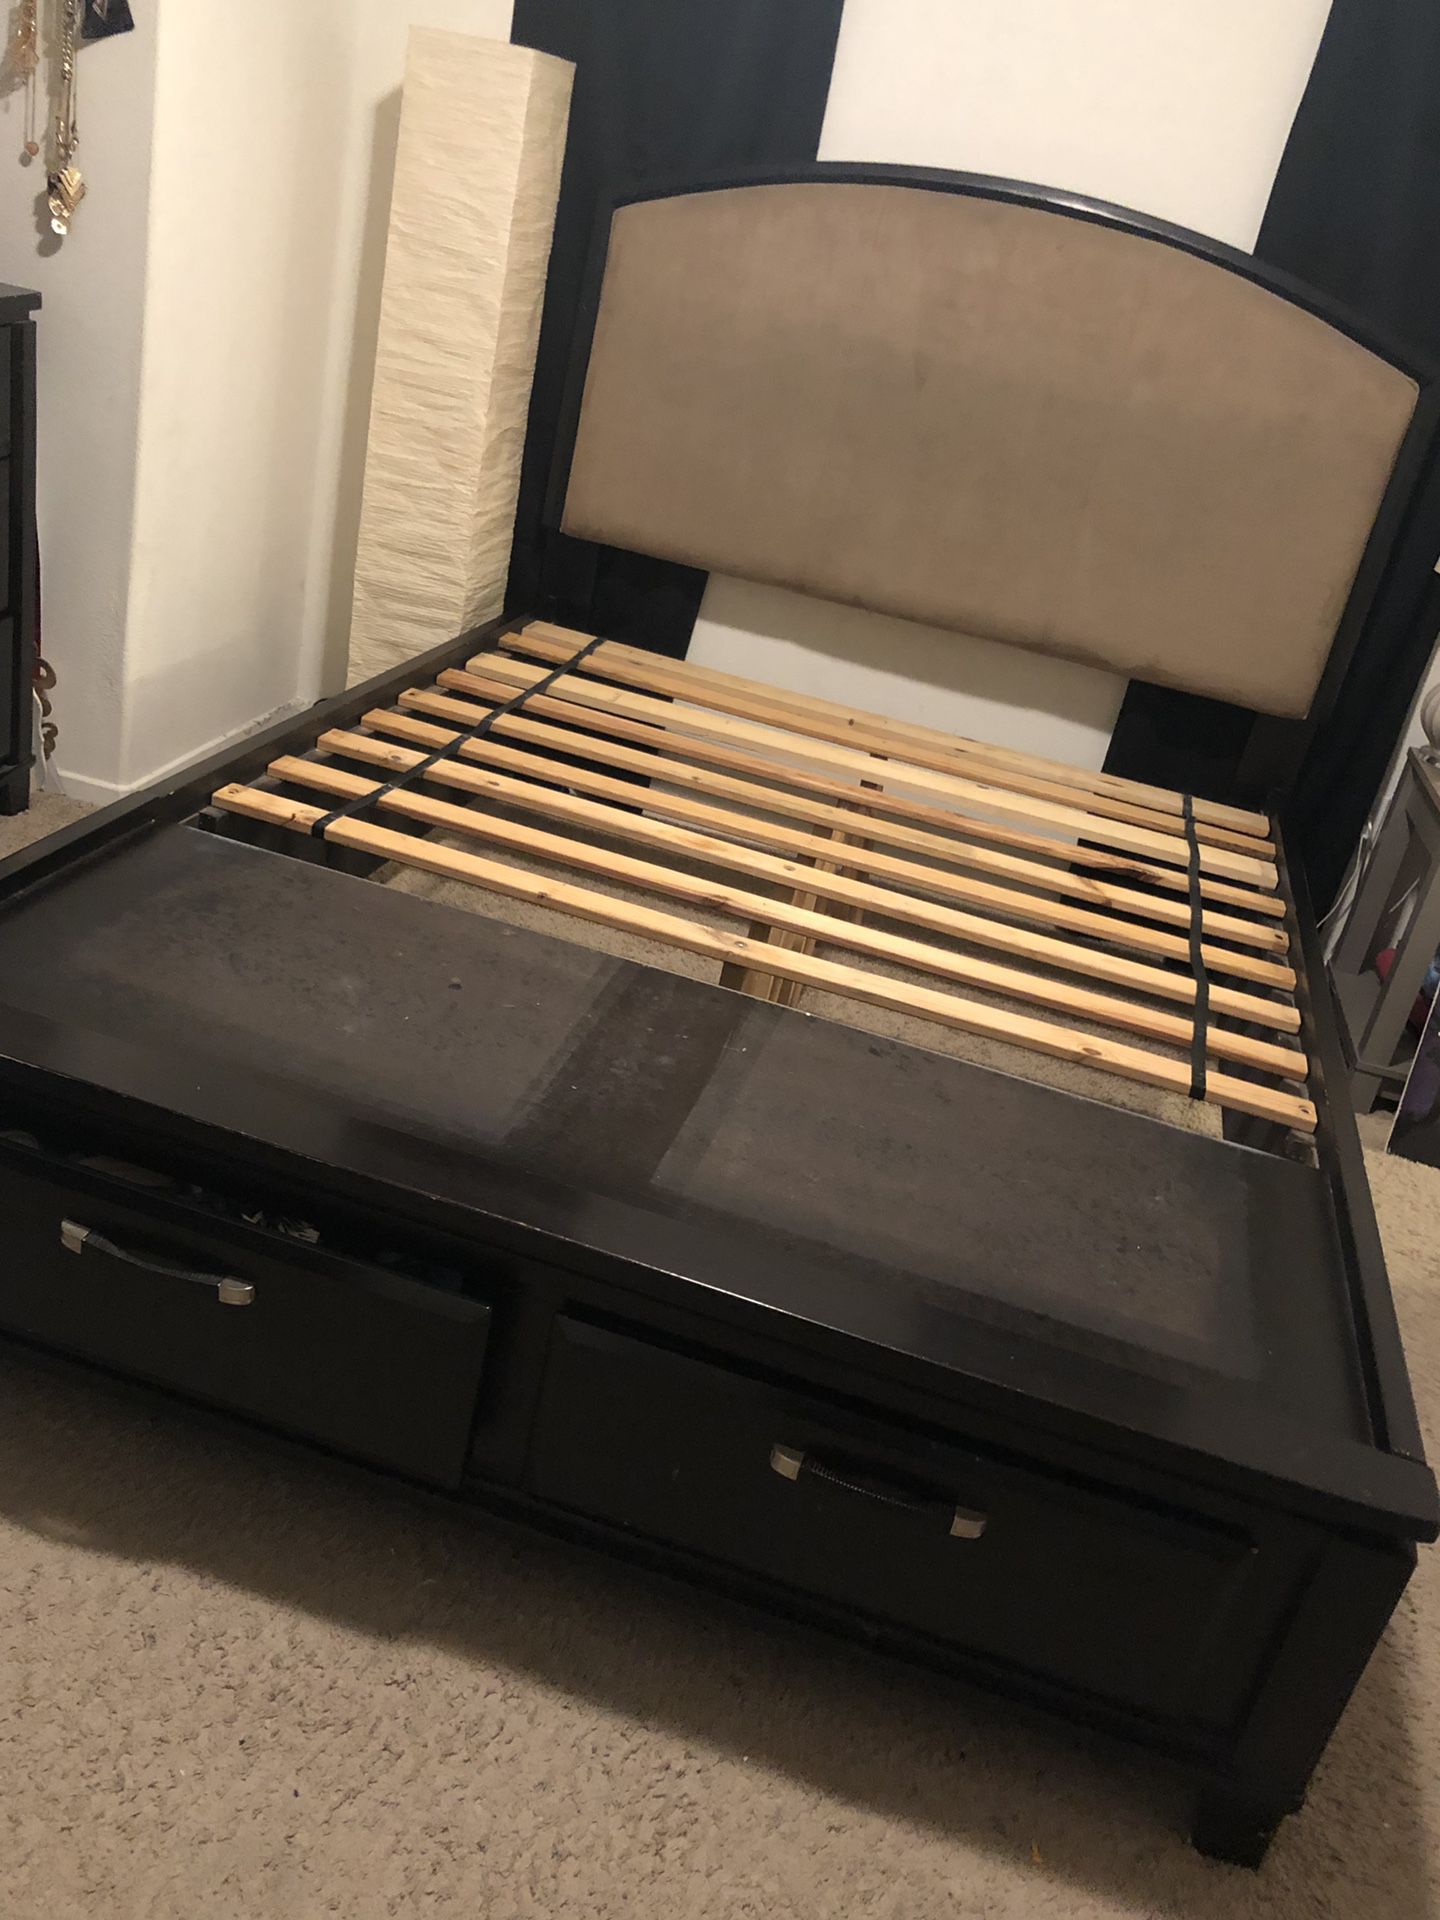 Padded Queen Bed Frame with two drawers. Few dents/scratches.